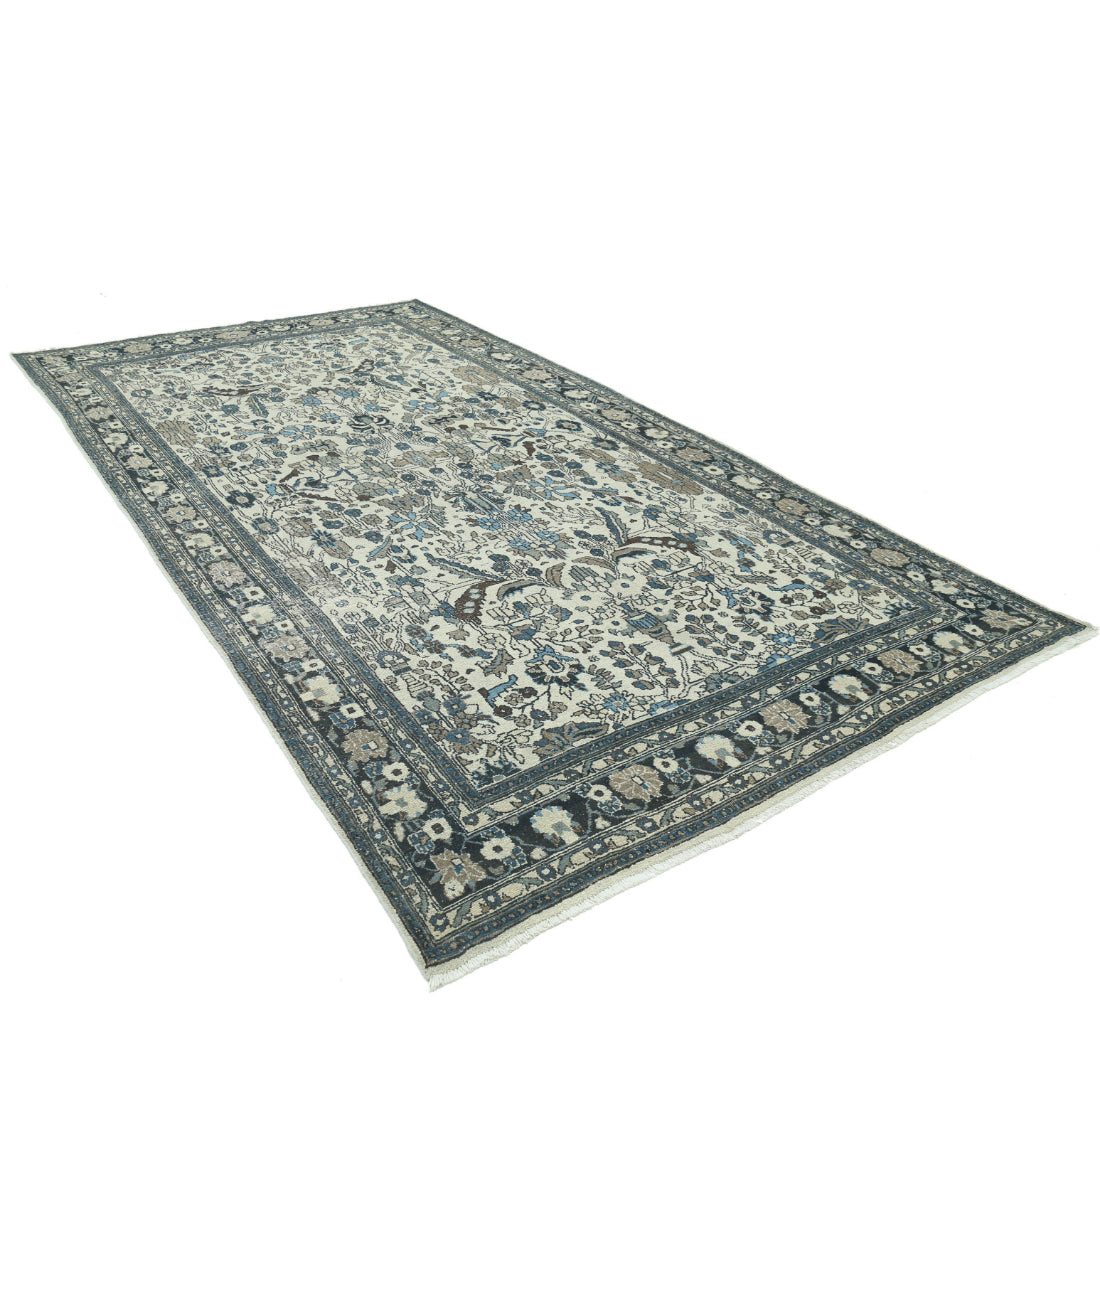 Hand Knotted Vintage Persian Bakhtiari Wool Rug - 7'2'' x 13'0'' 7'2'' x 13'0'' (215 X 390) / Ivory / Blue